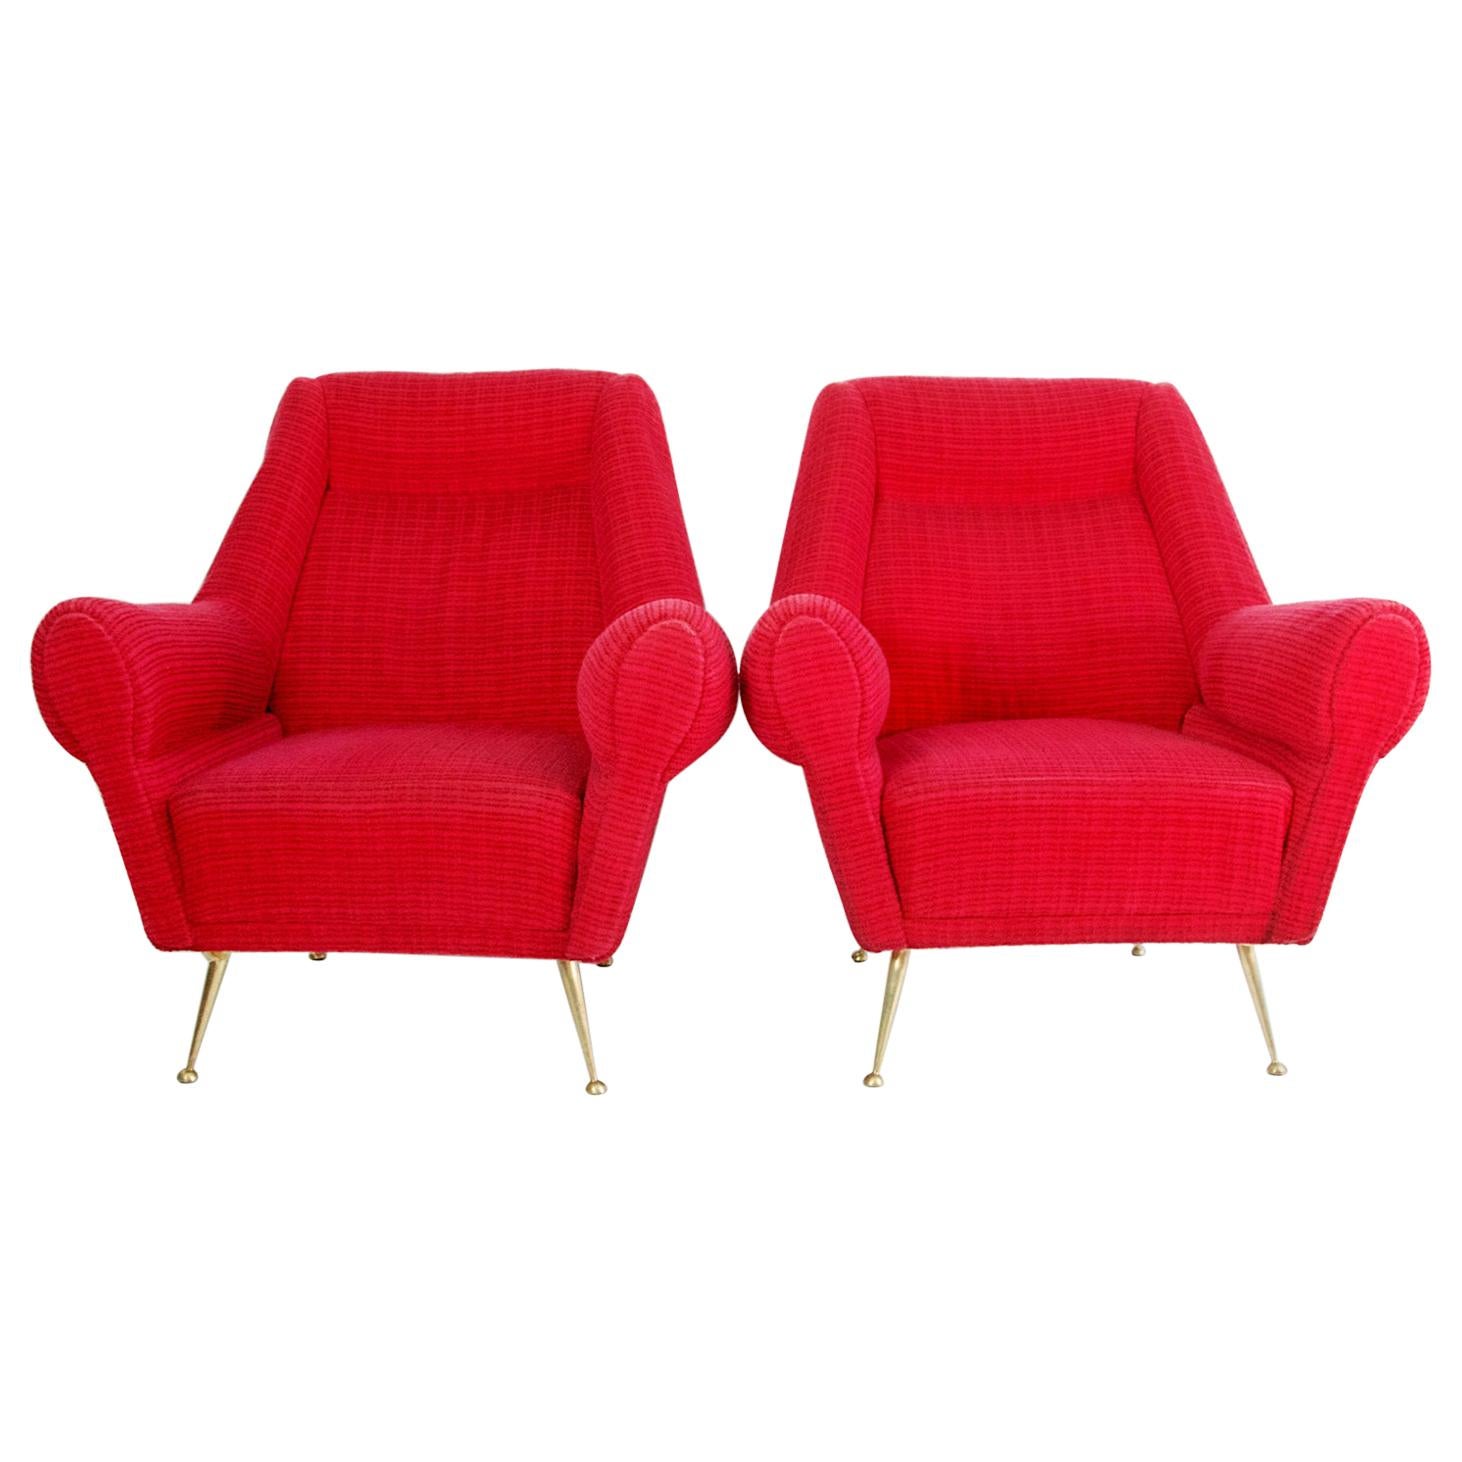 A pair of Italian armchairs designed by Gigi Radice for Minotti produced, circa 1950 with original fabric. Legs are in solid brass.